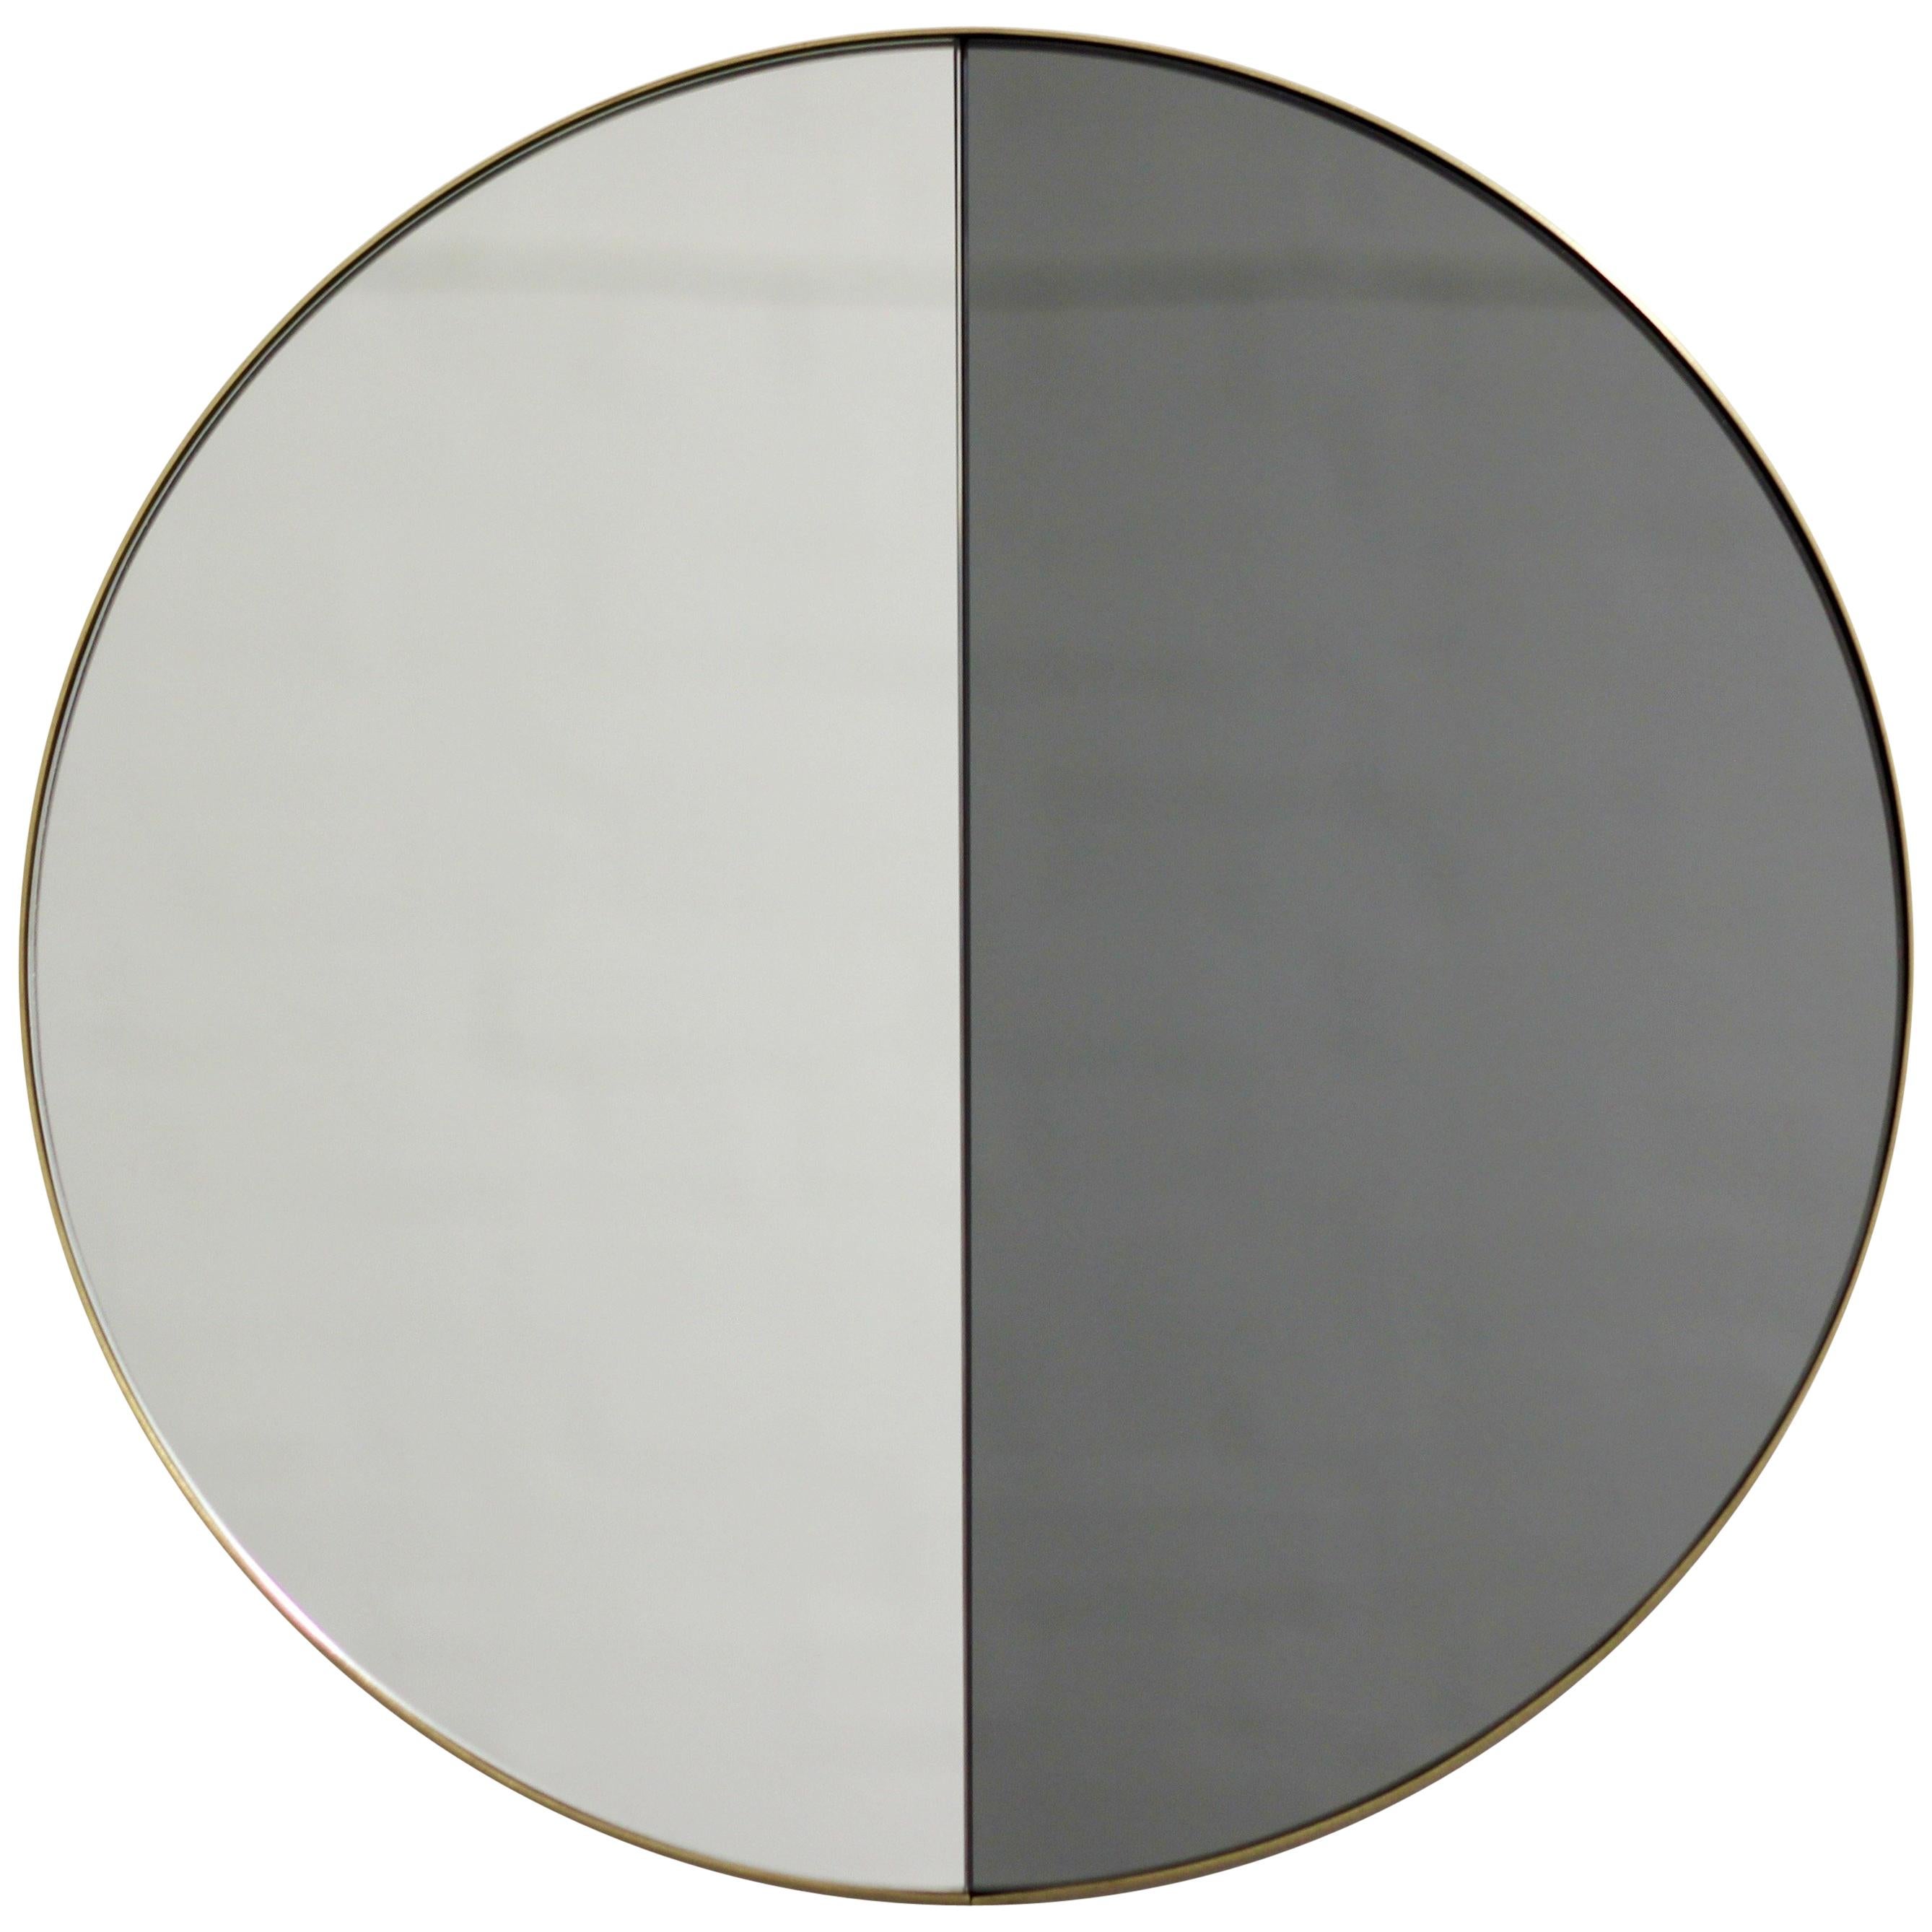 Contemporary mixed black and silver mirror tints Dualis Orbis with a brushed brass frame. Designed and handcrafted in London, UK.

Fitted with an ingenious French cleat (split batten) system so they may hang flush with the wall in four possible